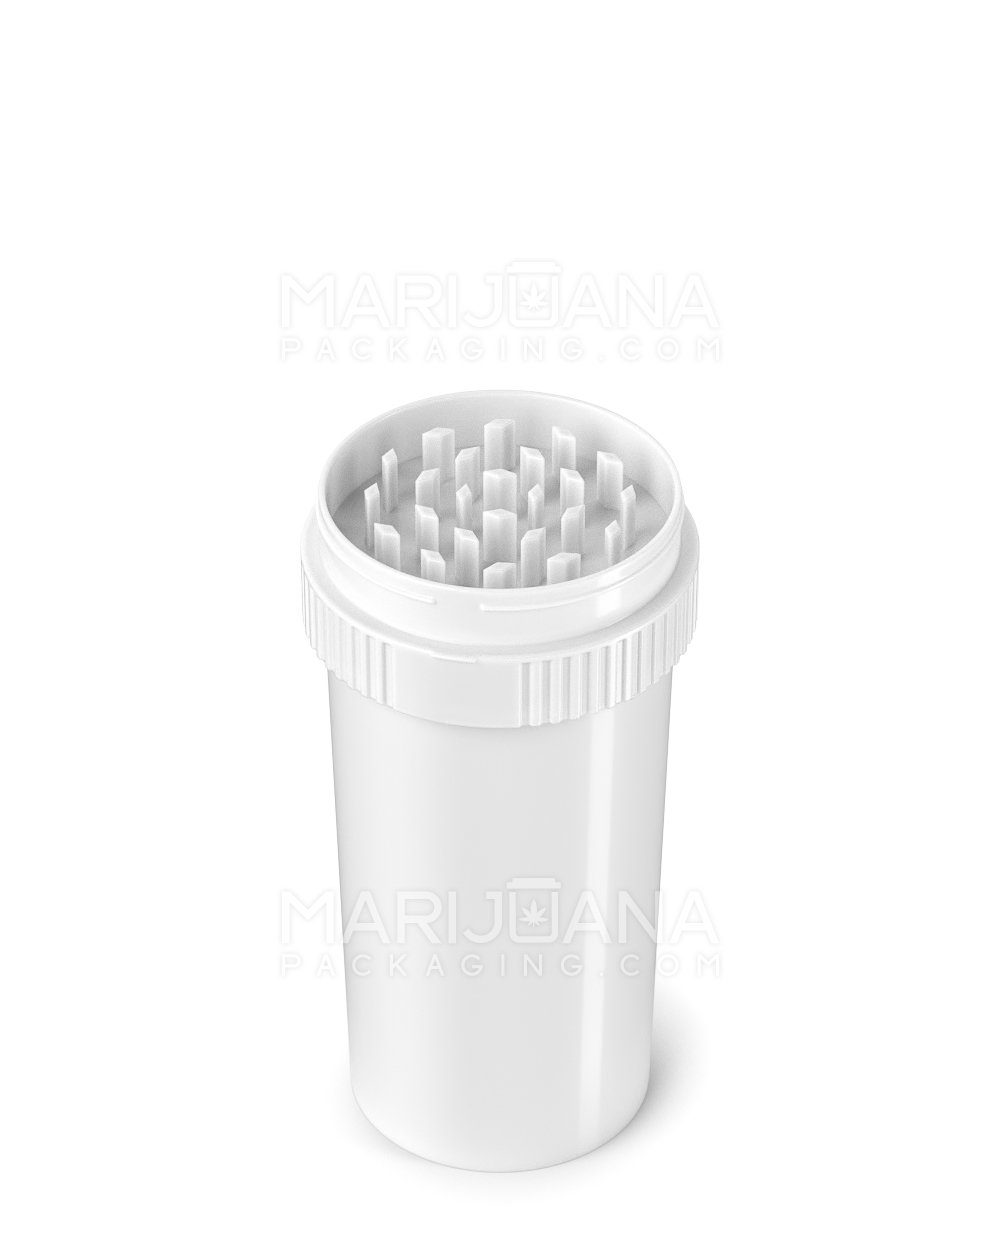 Child Resistant | Push & Turn Vial with Grinder Cap | 40dr - White Plastic - 150 Count - 2